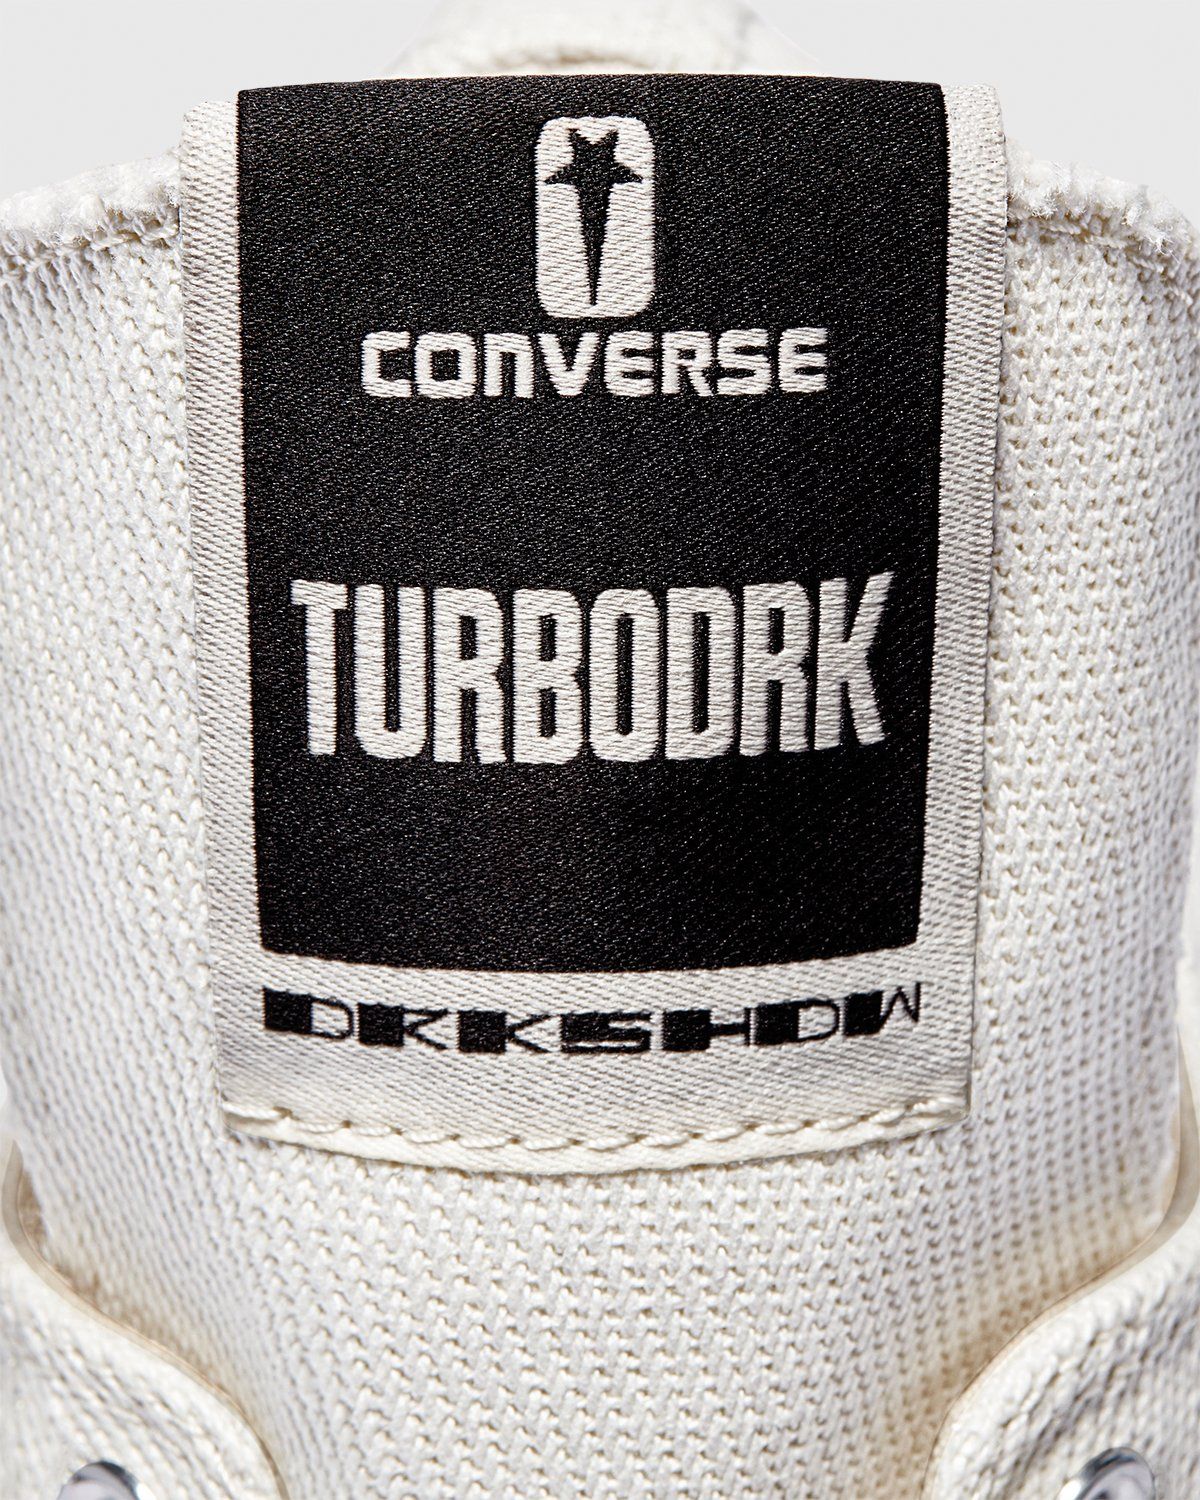 Converse – DRKSHDW TURBODRK Chuck 70 White - Sneakers - White - Image 7